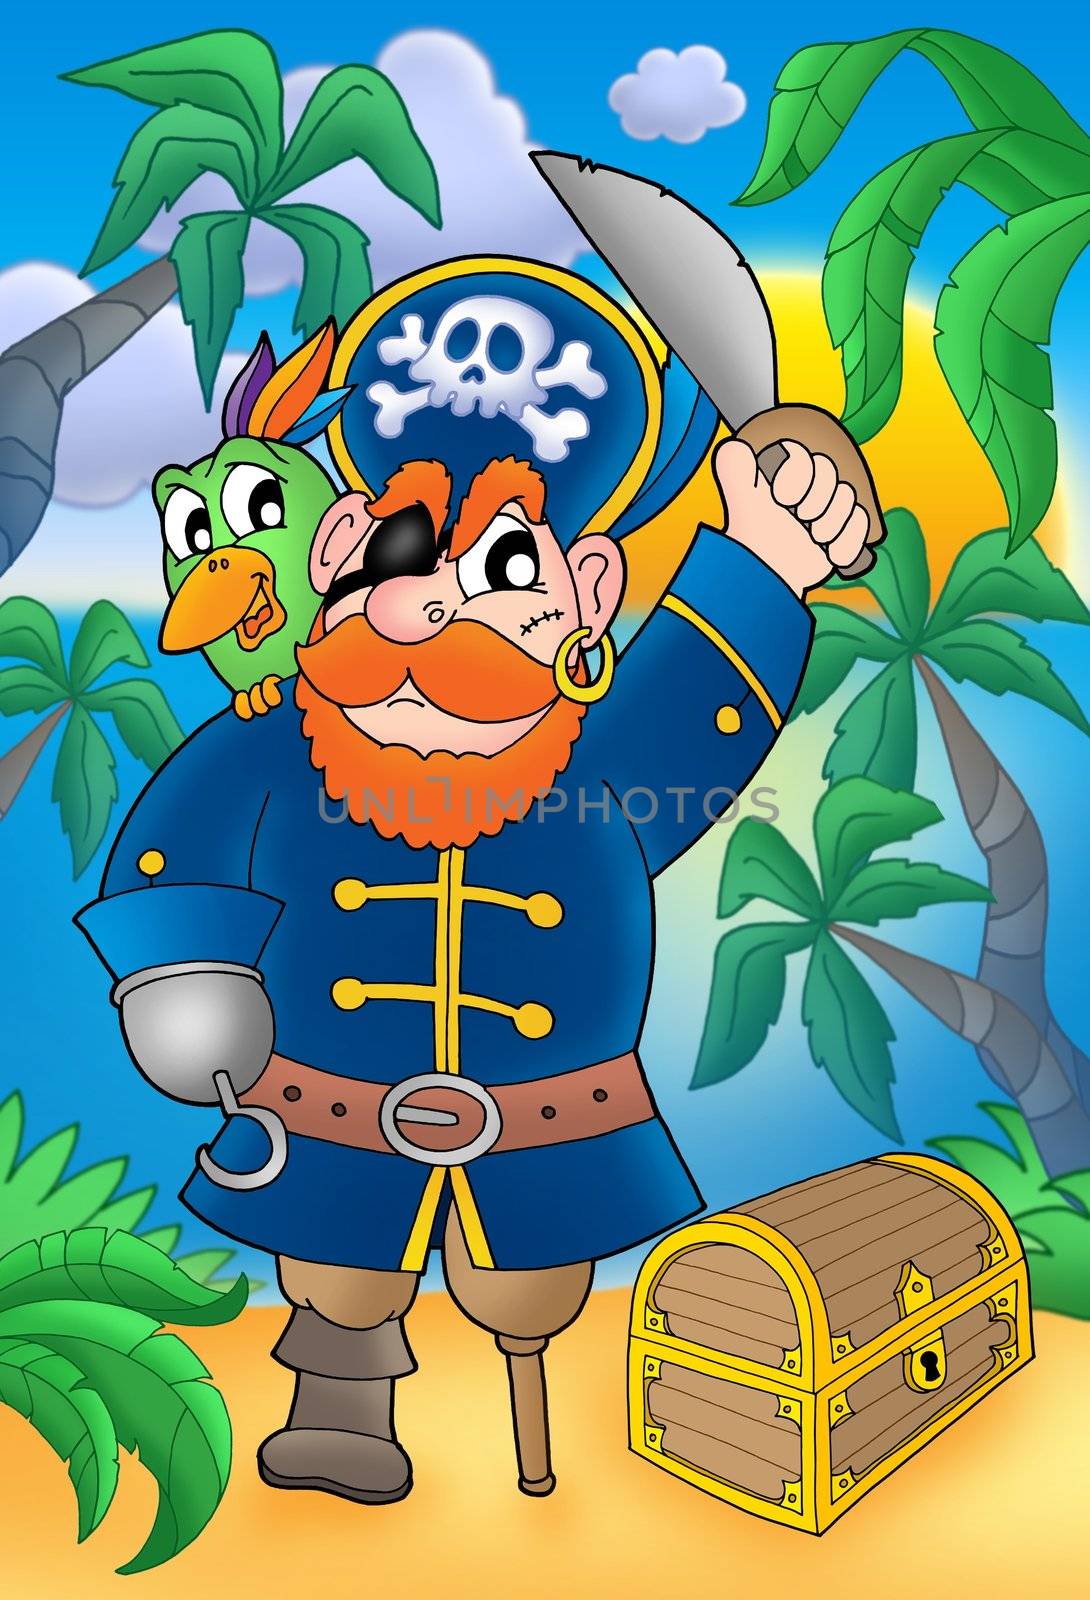 Pirate with parrot and treasure chest - color illustration.